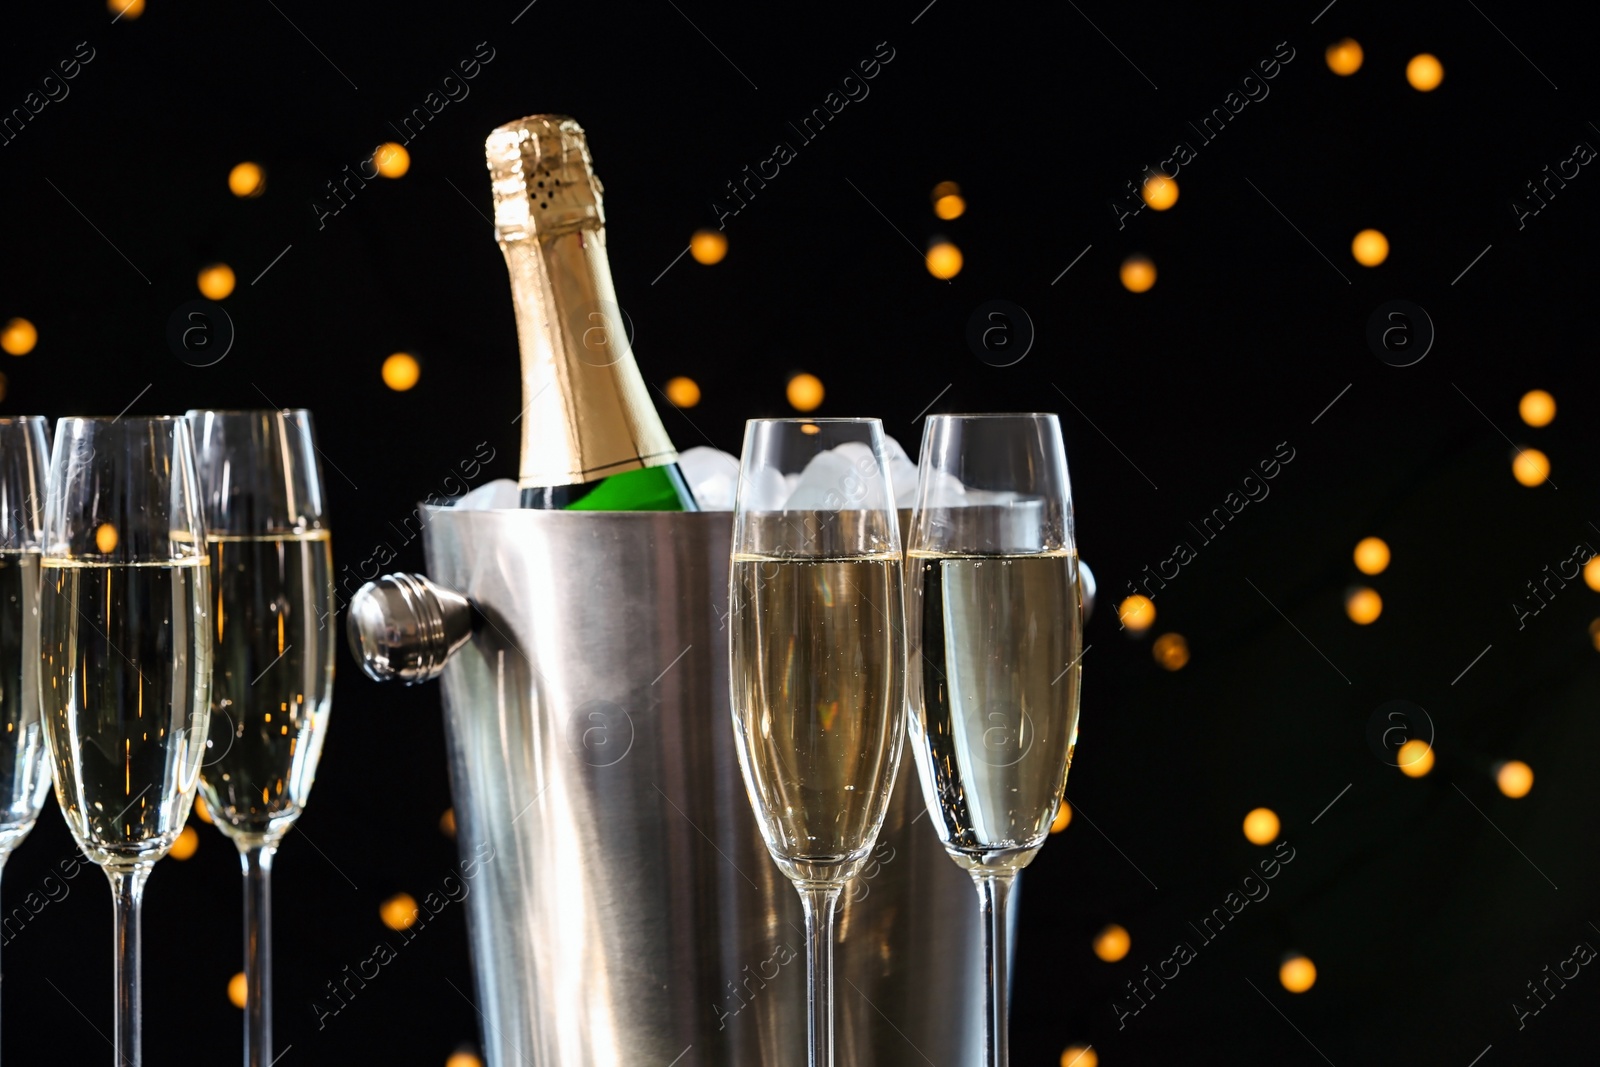 Photo of Glasses with champagne and bottle in bucket against blurred lights